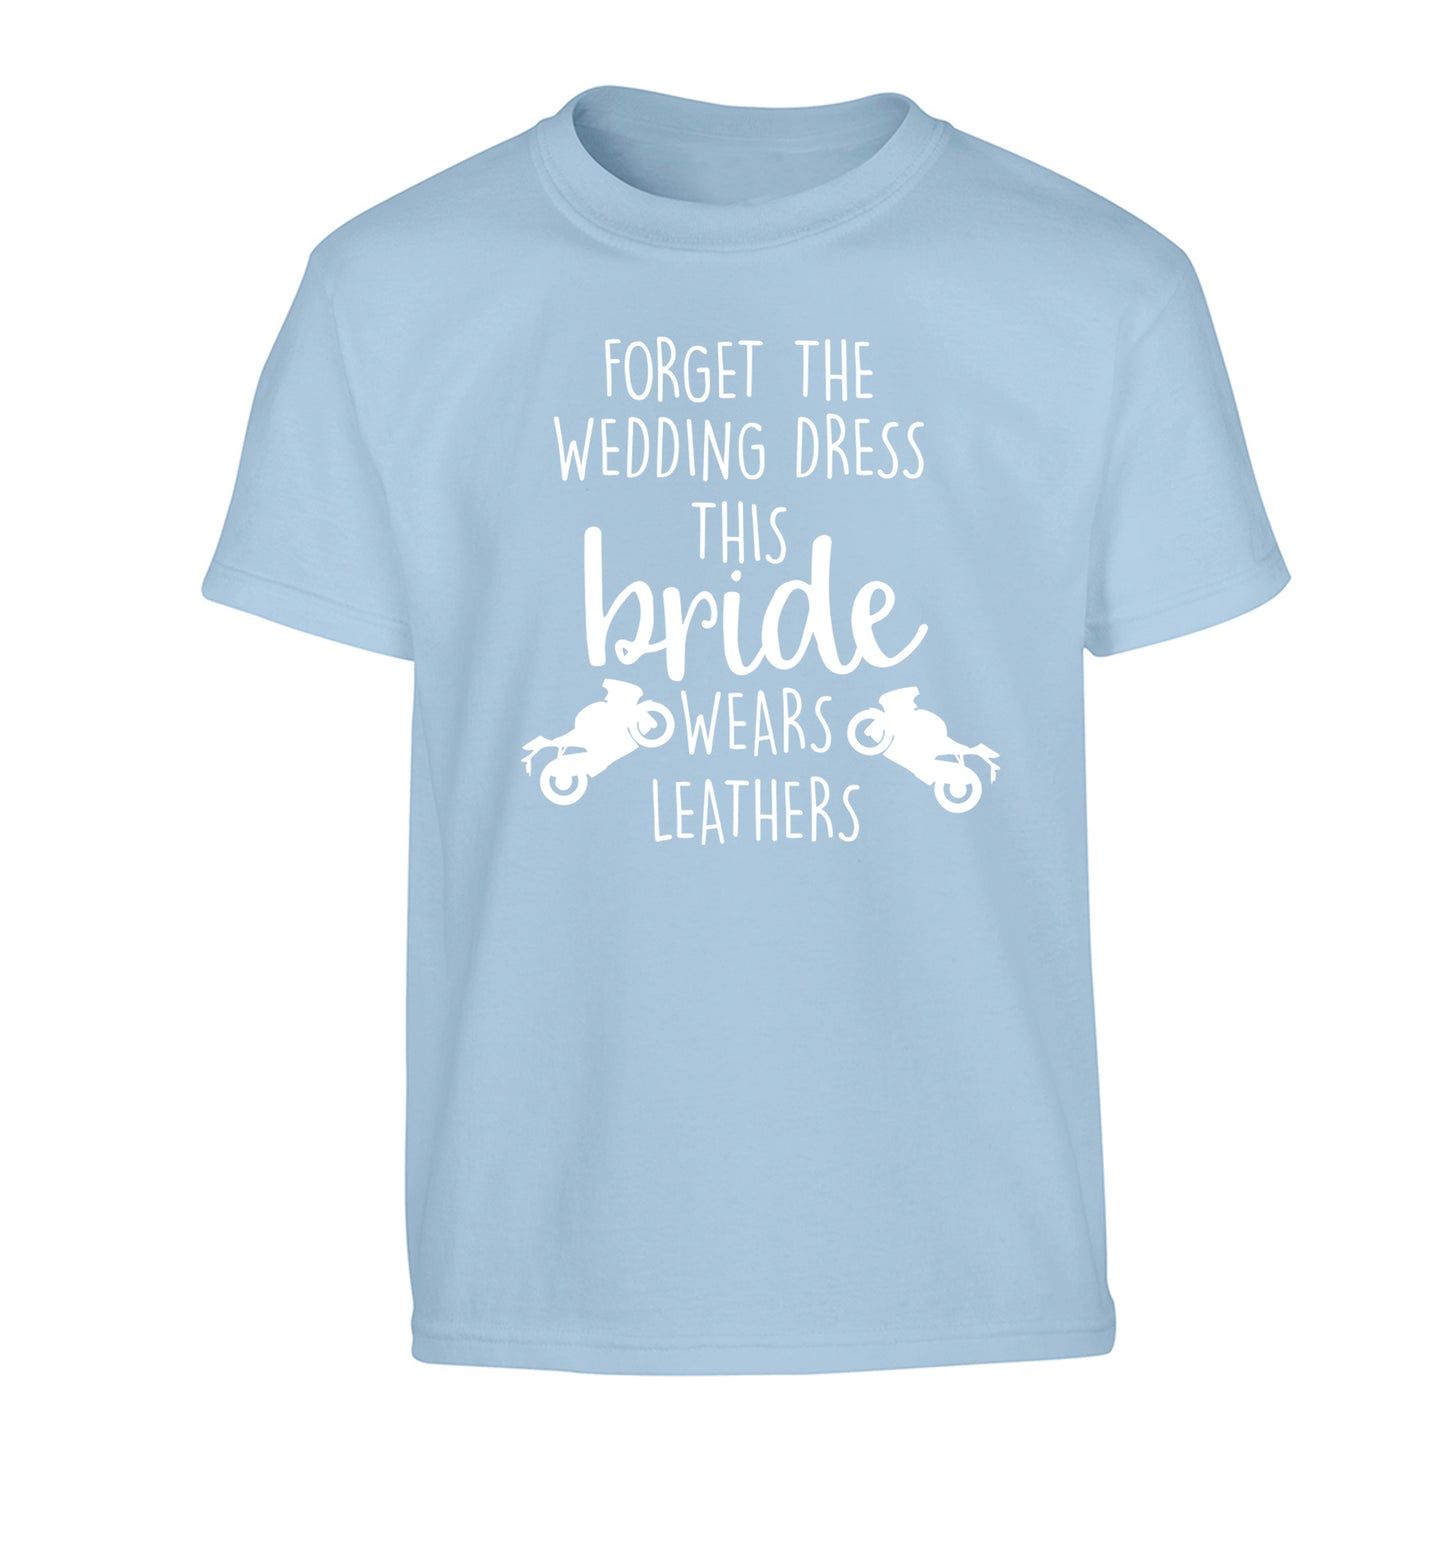 Forget the wedding dress this bride wears leathers Children's light blue Tshirt 12-13 Years